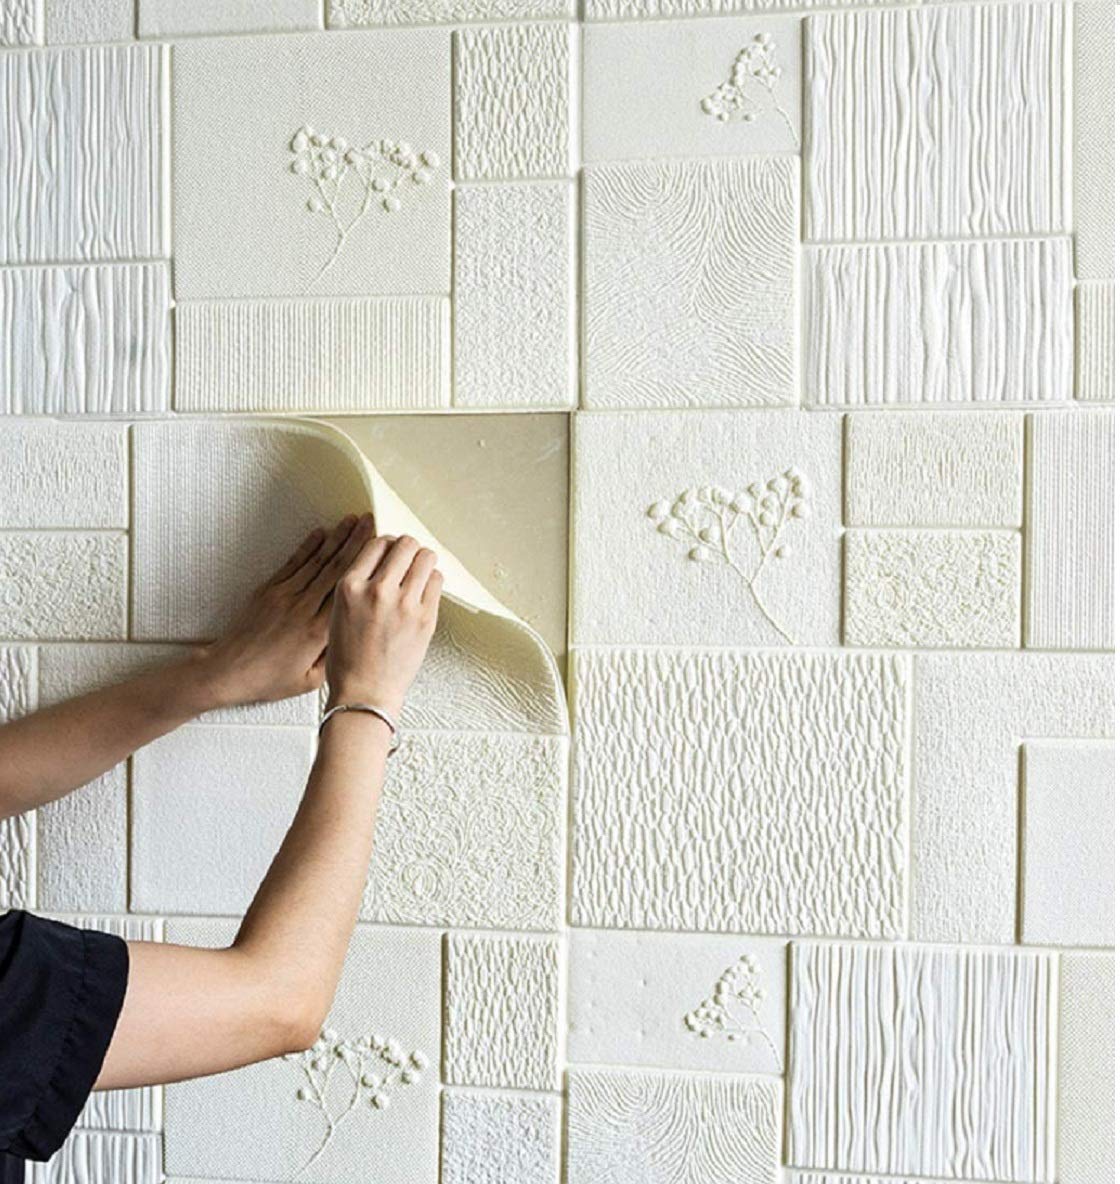 3D Brick Foam Ceiling Wallpaper for Bedroom Tiles Panel Stickers for Living Room,self-Adhesive Wall for Home Decoration (70 * 70 cm) (4, PUMI)